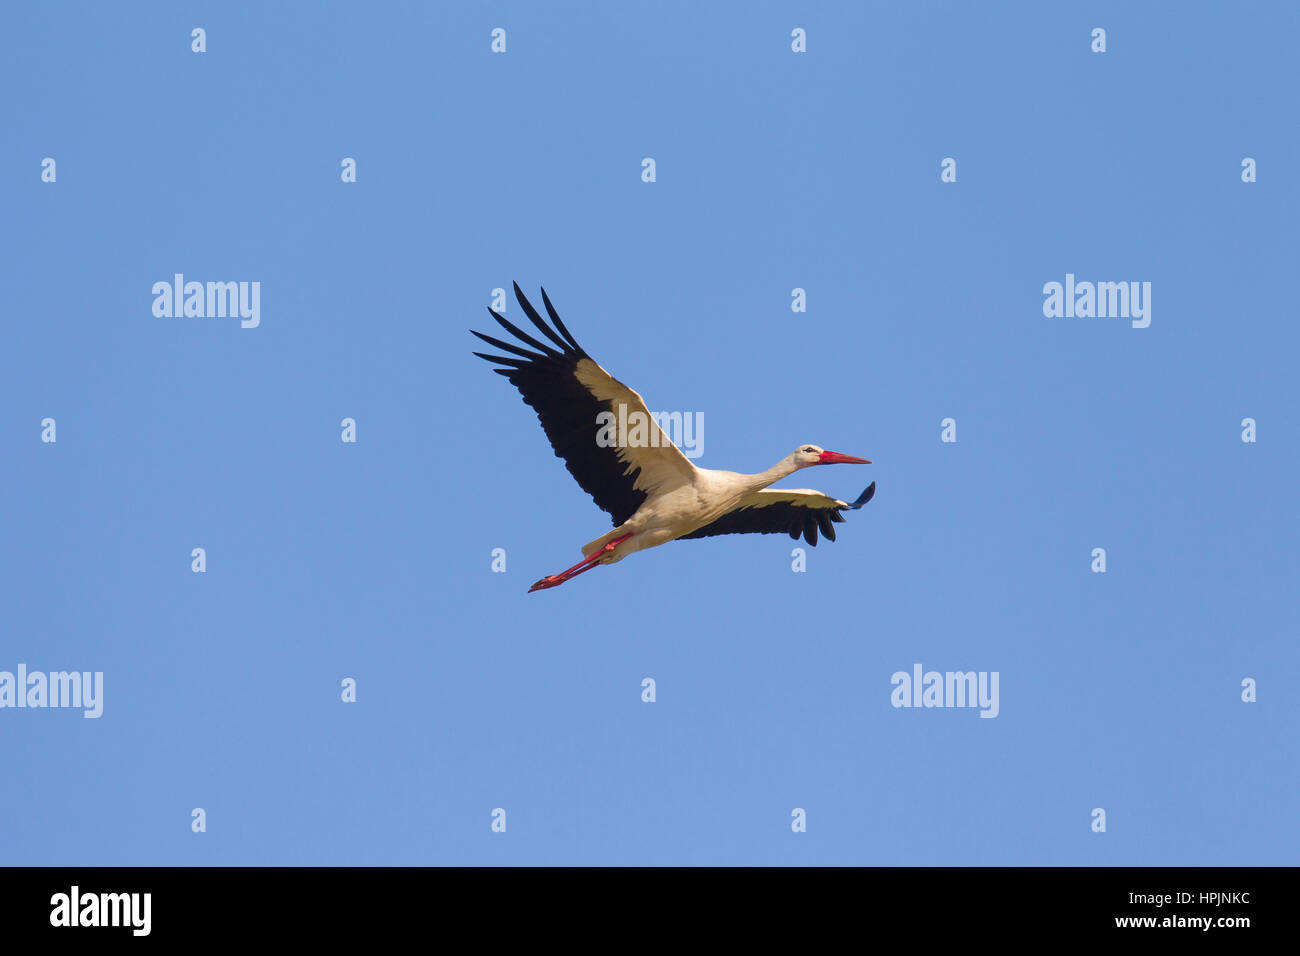 White stork (Ciconia ciconia) in flight against blue sky Stock Photo